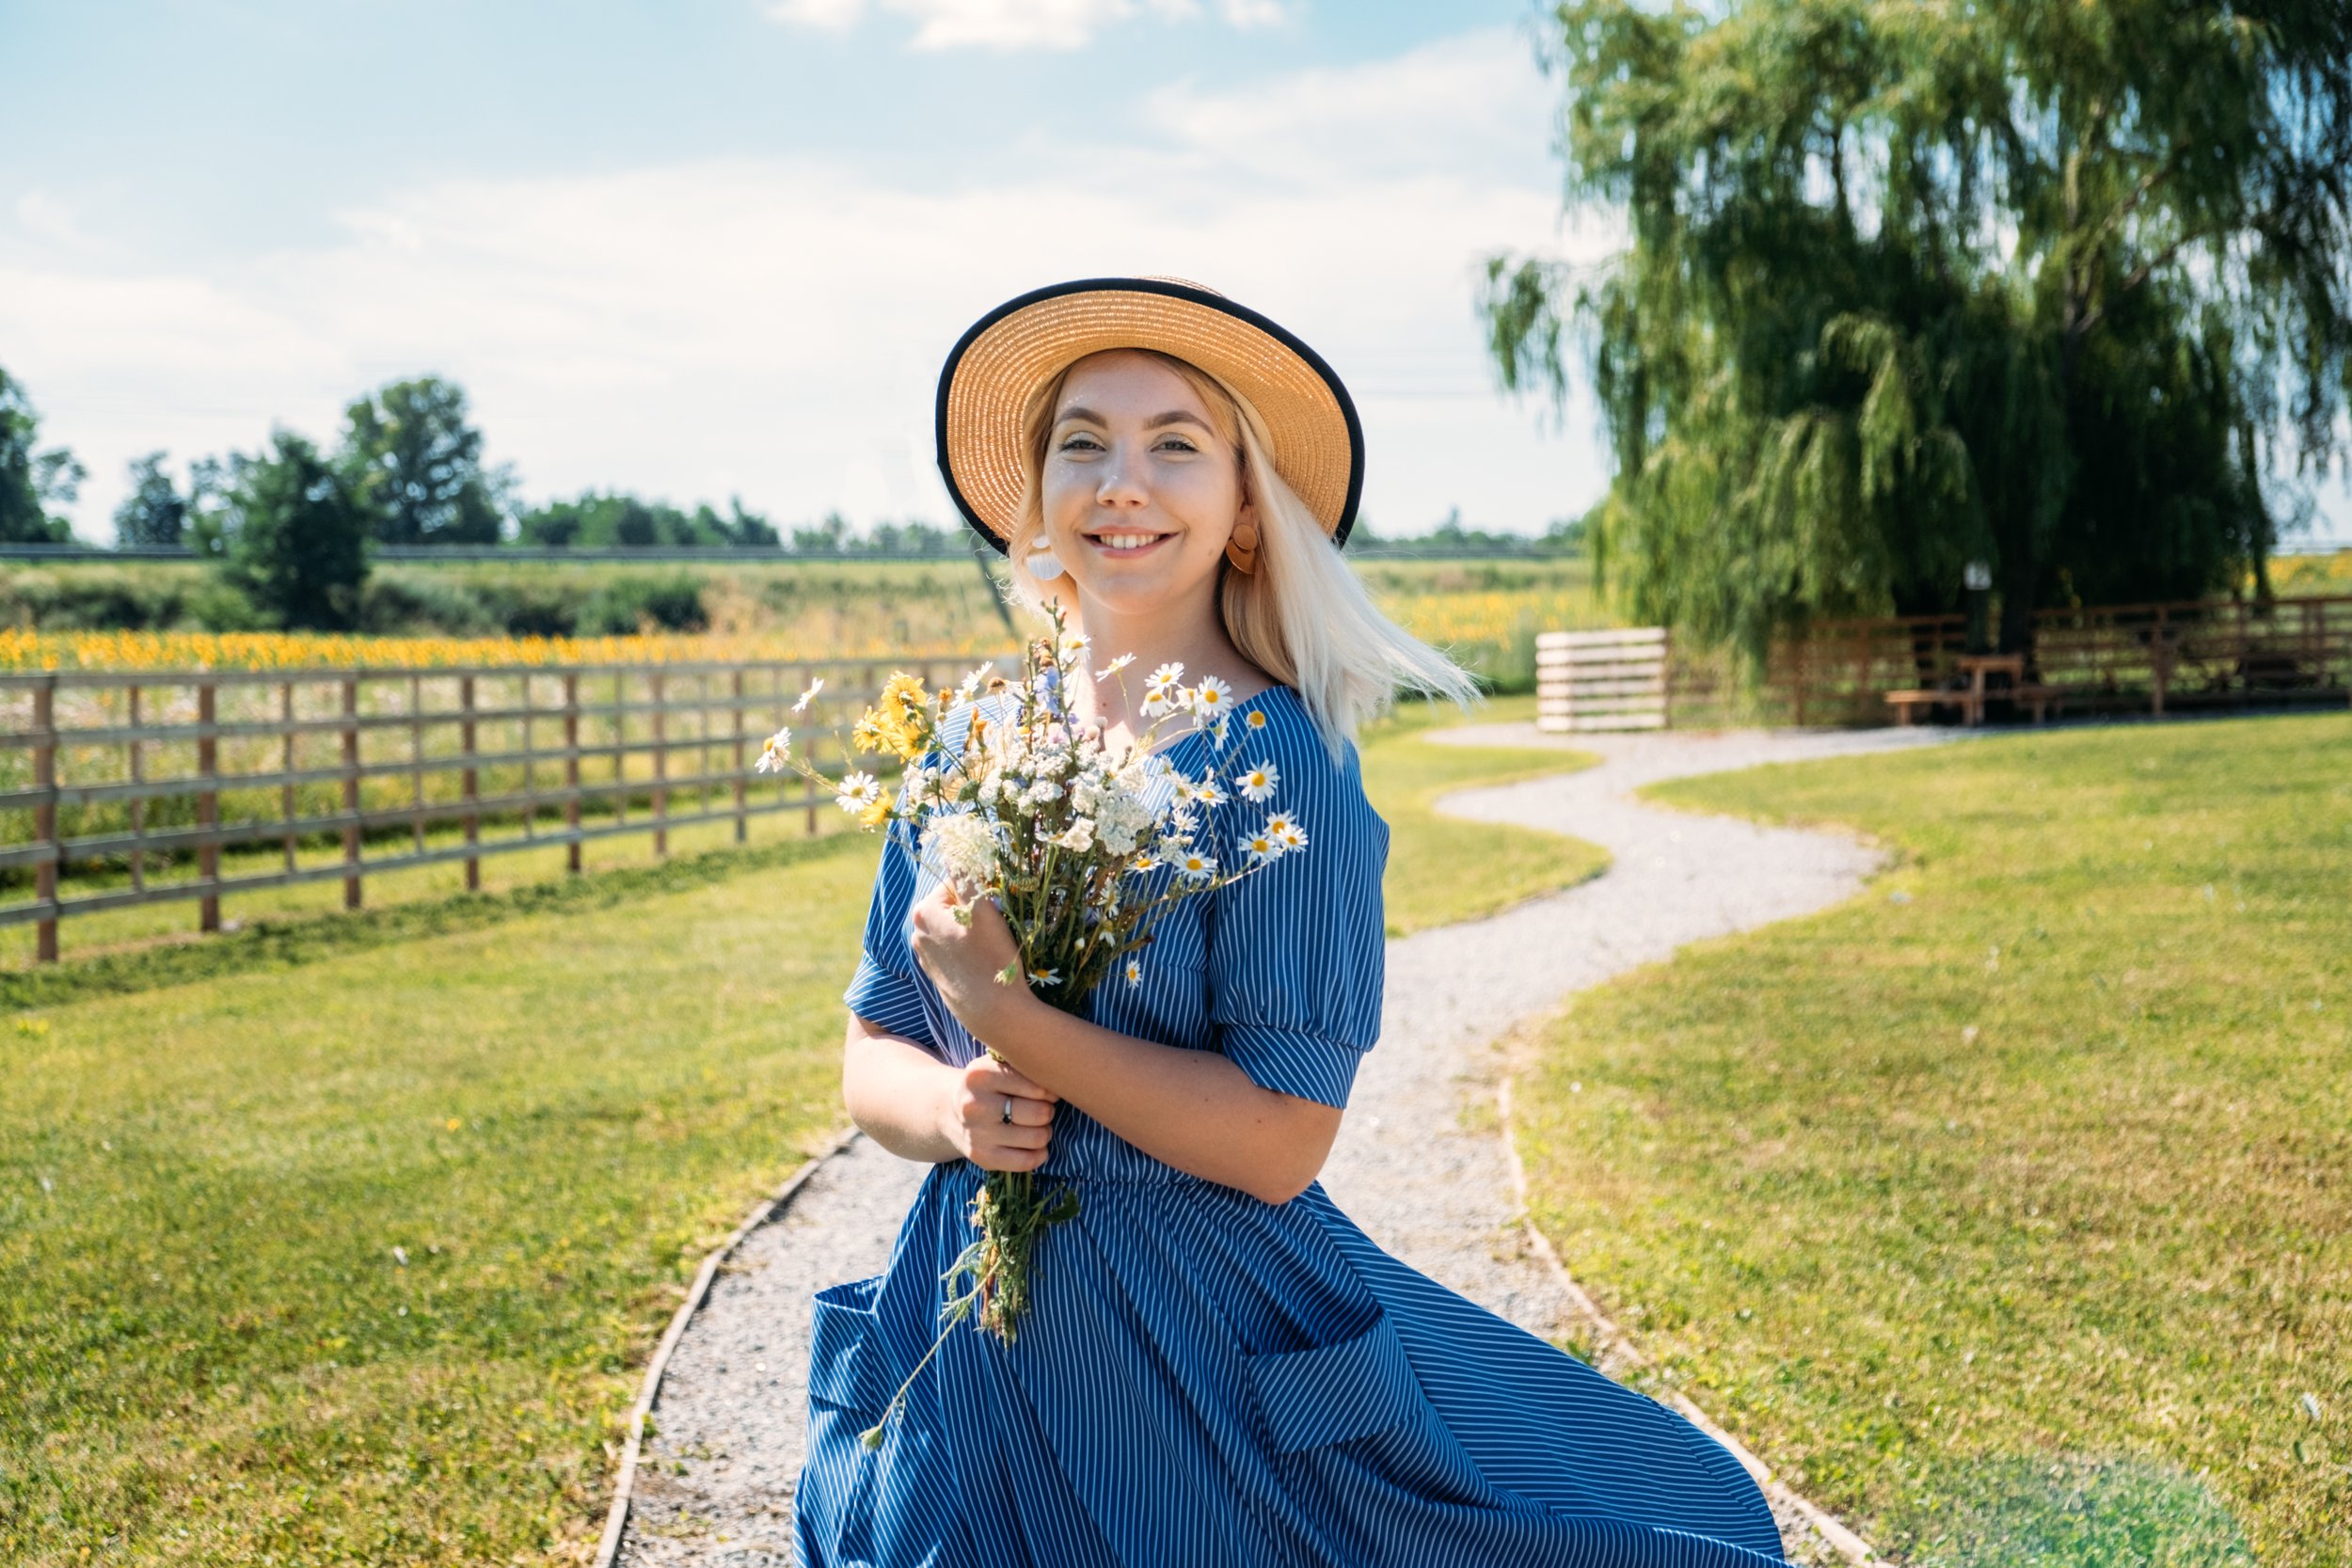 Countryside Serenity: Smiling Mennonite Woman with Flowers - Garden City Dental Health